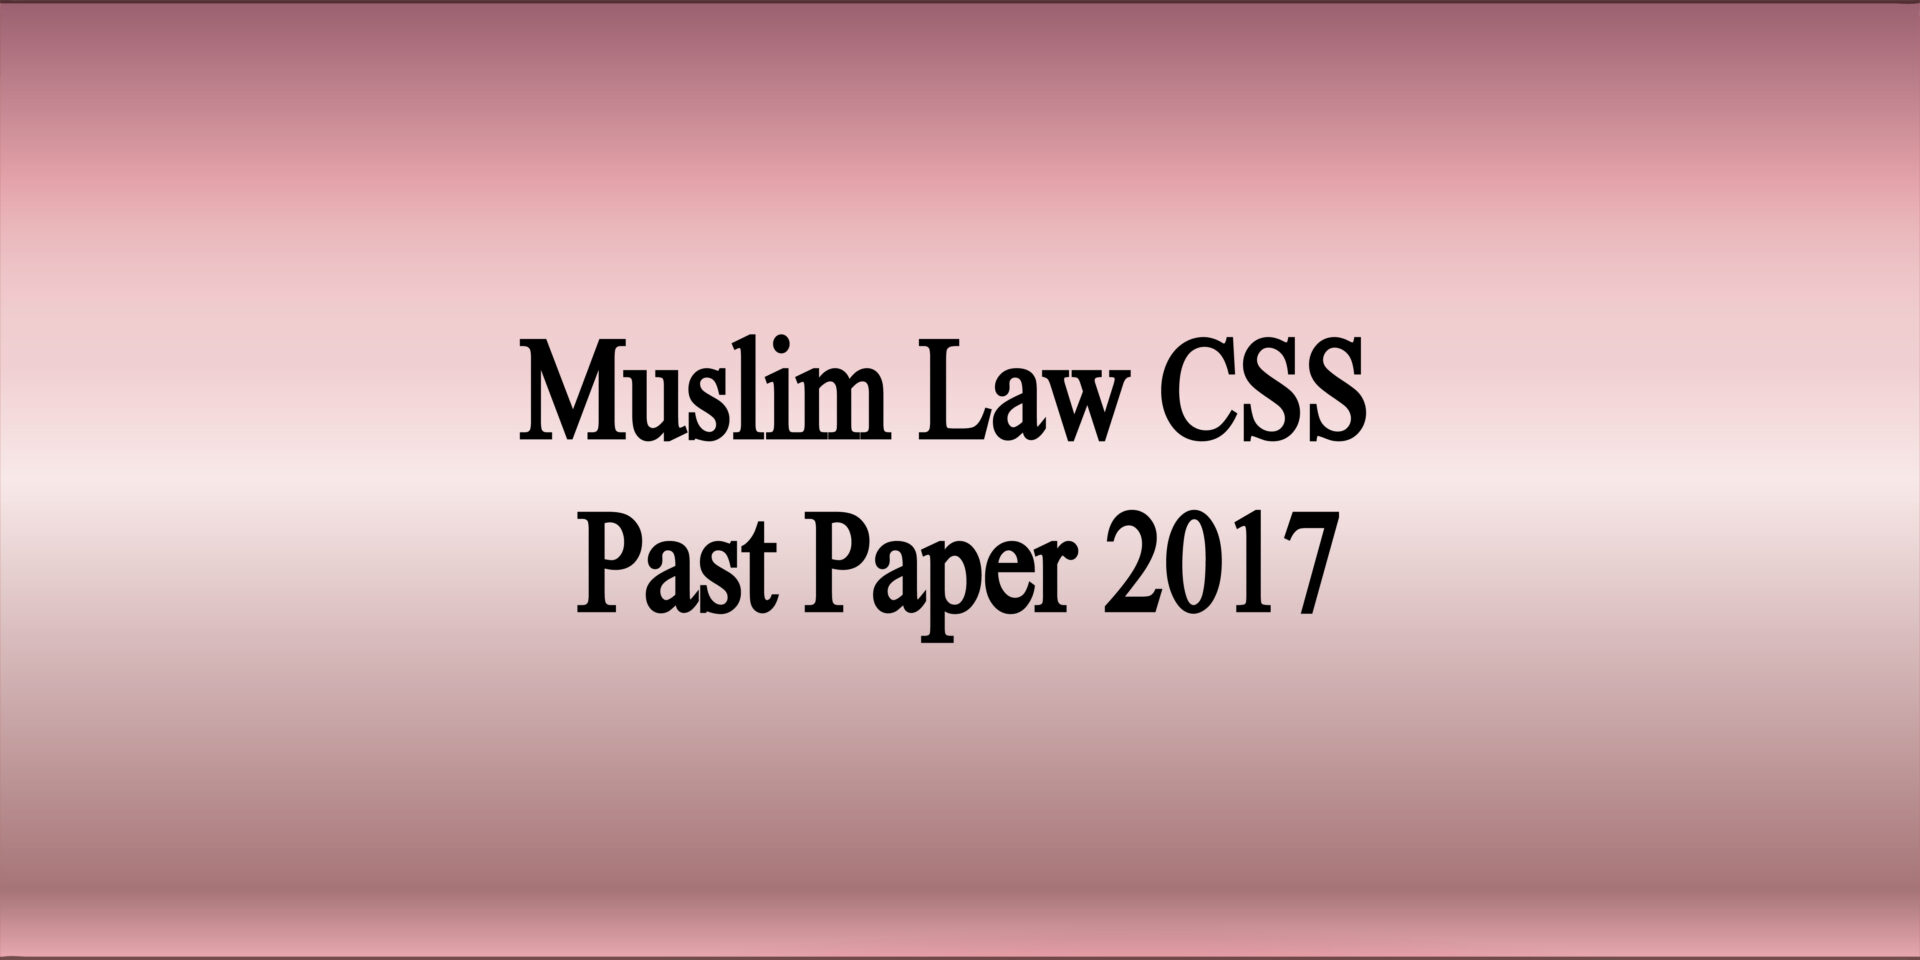 Muslim Law CSS Past Paper 2017